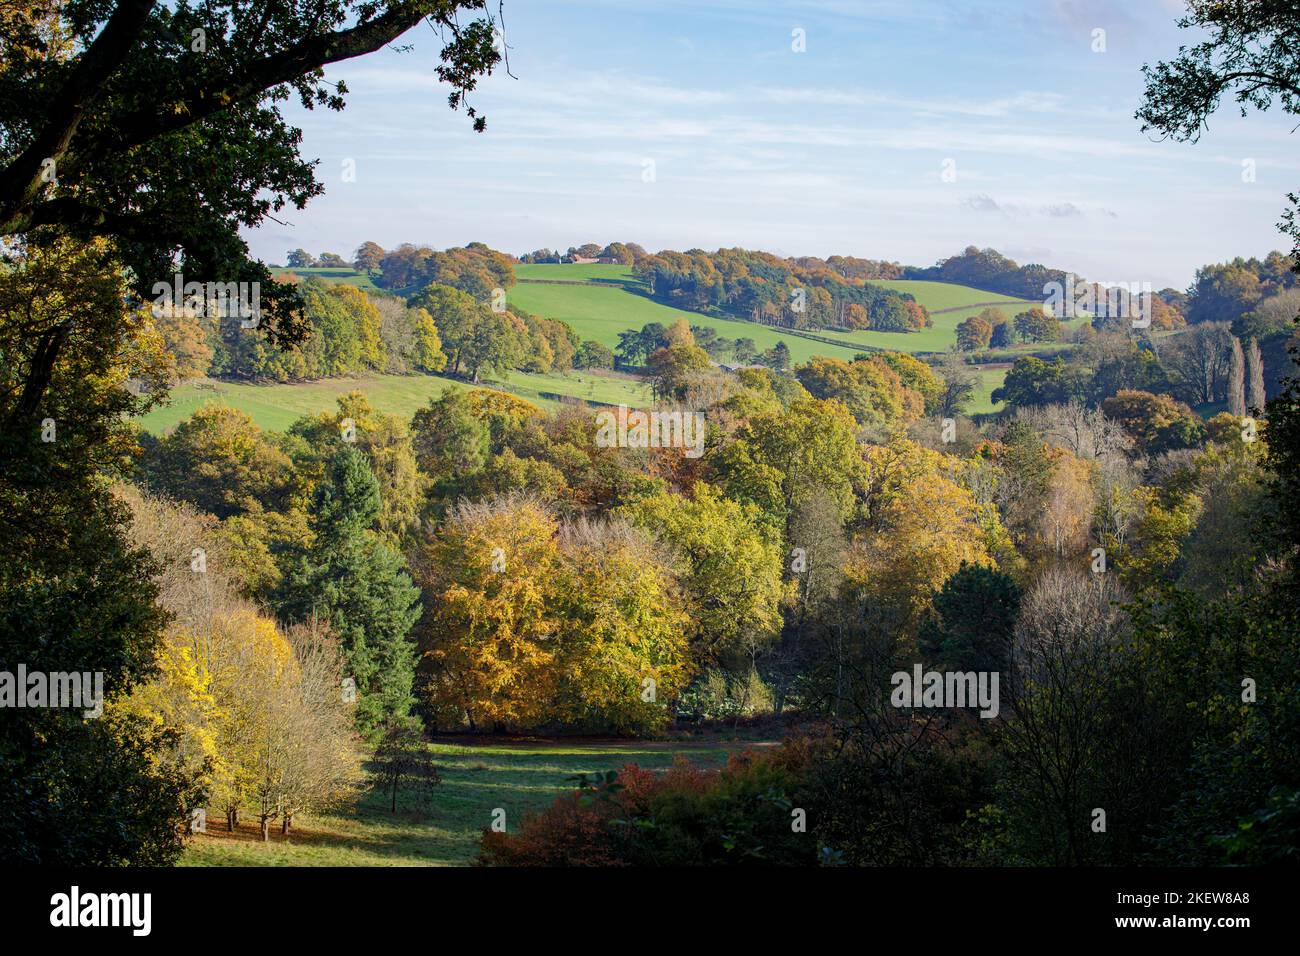 View of downland, farmland and trees with autumn colour foliage from Winkworth Arboretum near Godalming, Surrey, south-east England Stock Photo